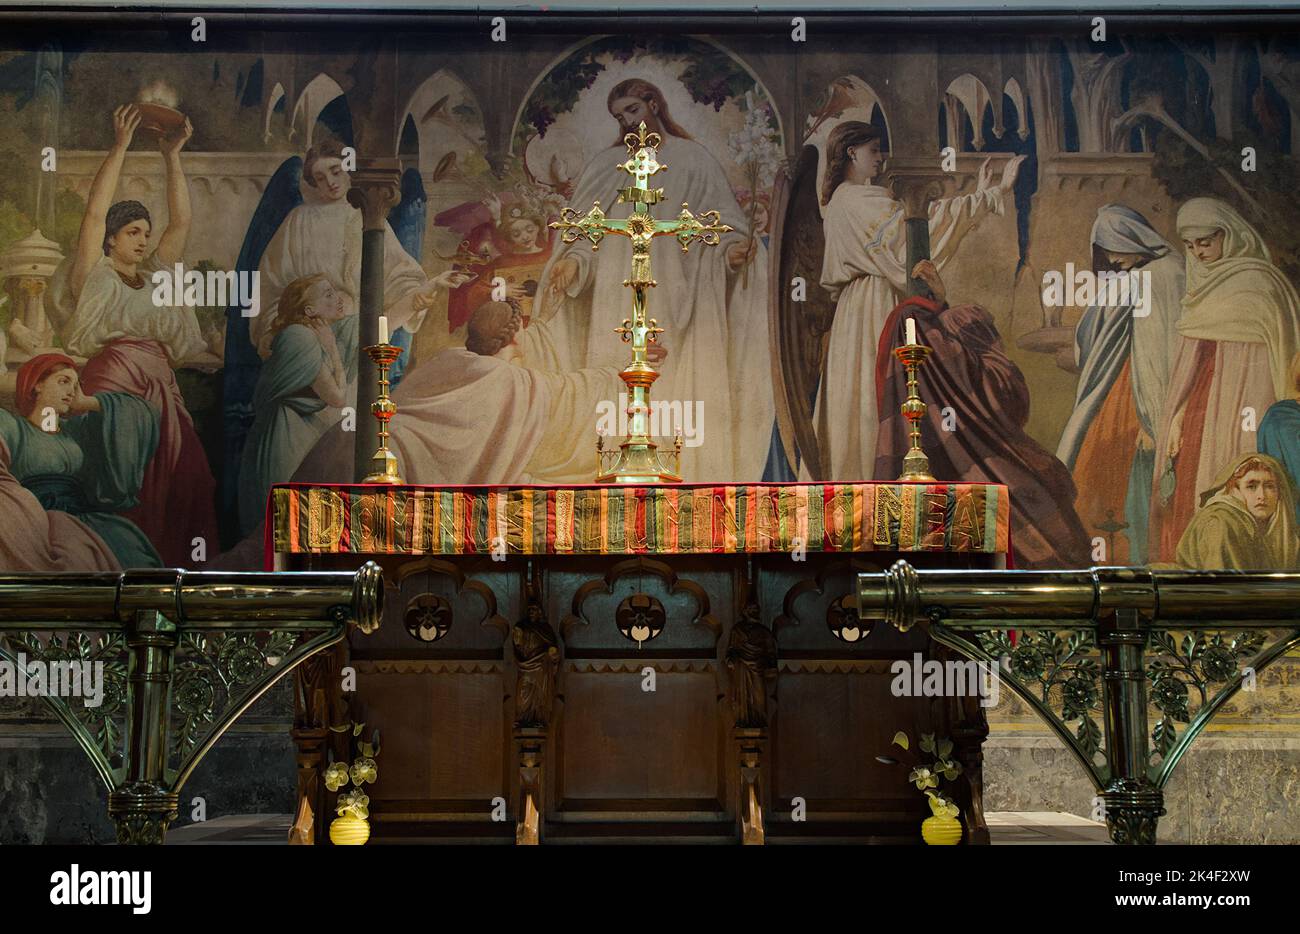 The Altar With Cross And Candlesticks In Front Of A Fresco By Lord Frederick Leighton In The Church Of Saint Michael and All Angels Lyndhurst UK Stock Photo